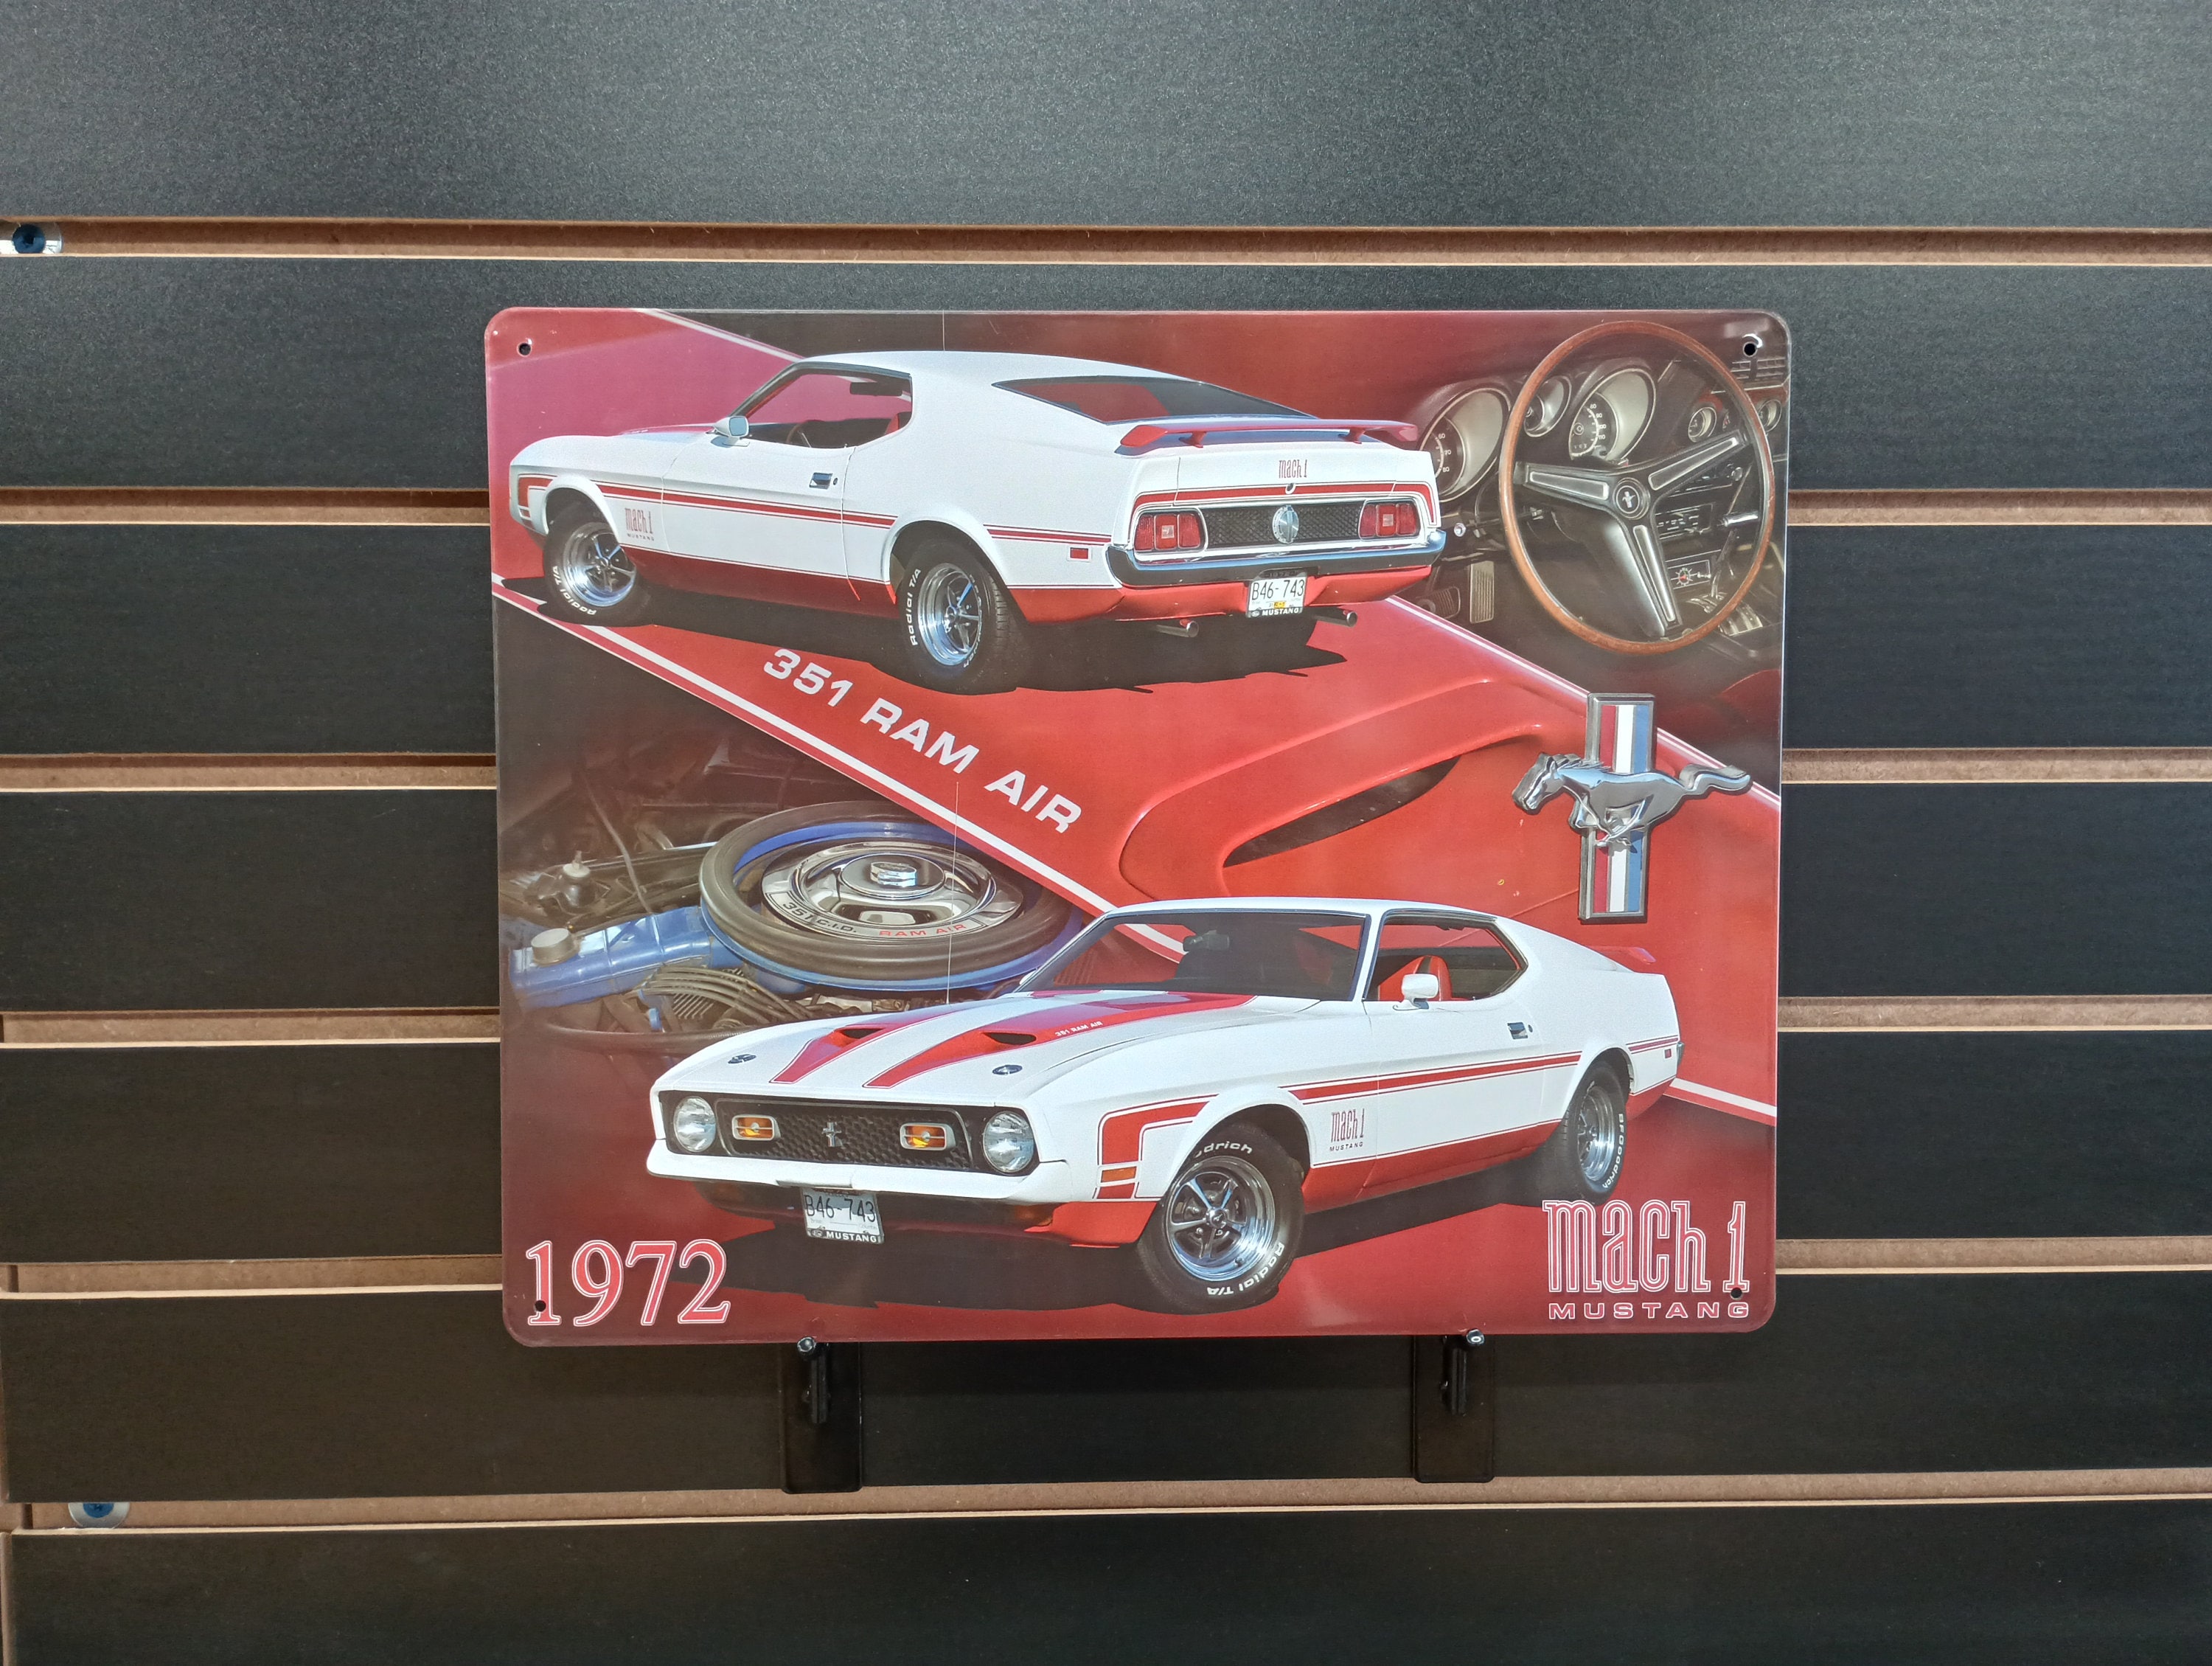 American Muscle 1972 Ford Mustang Fastback (Class of 1972) 1:18 Scale